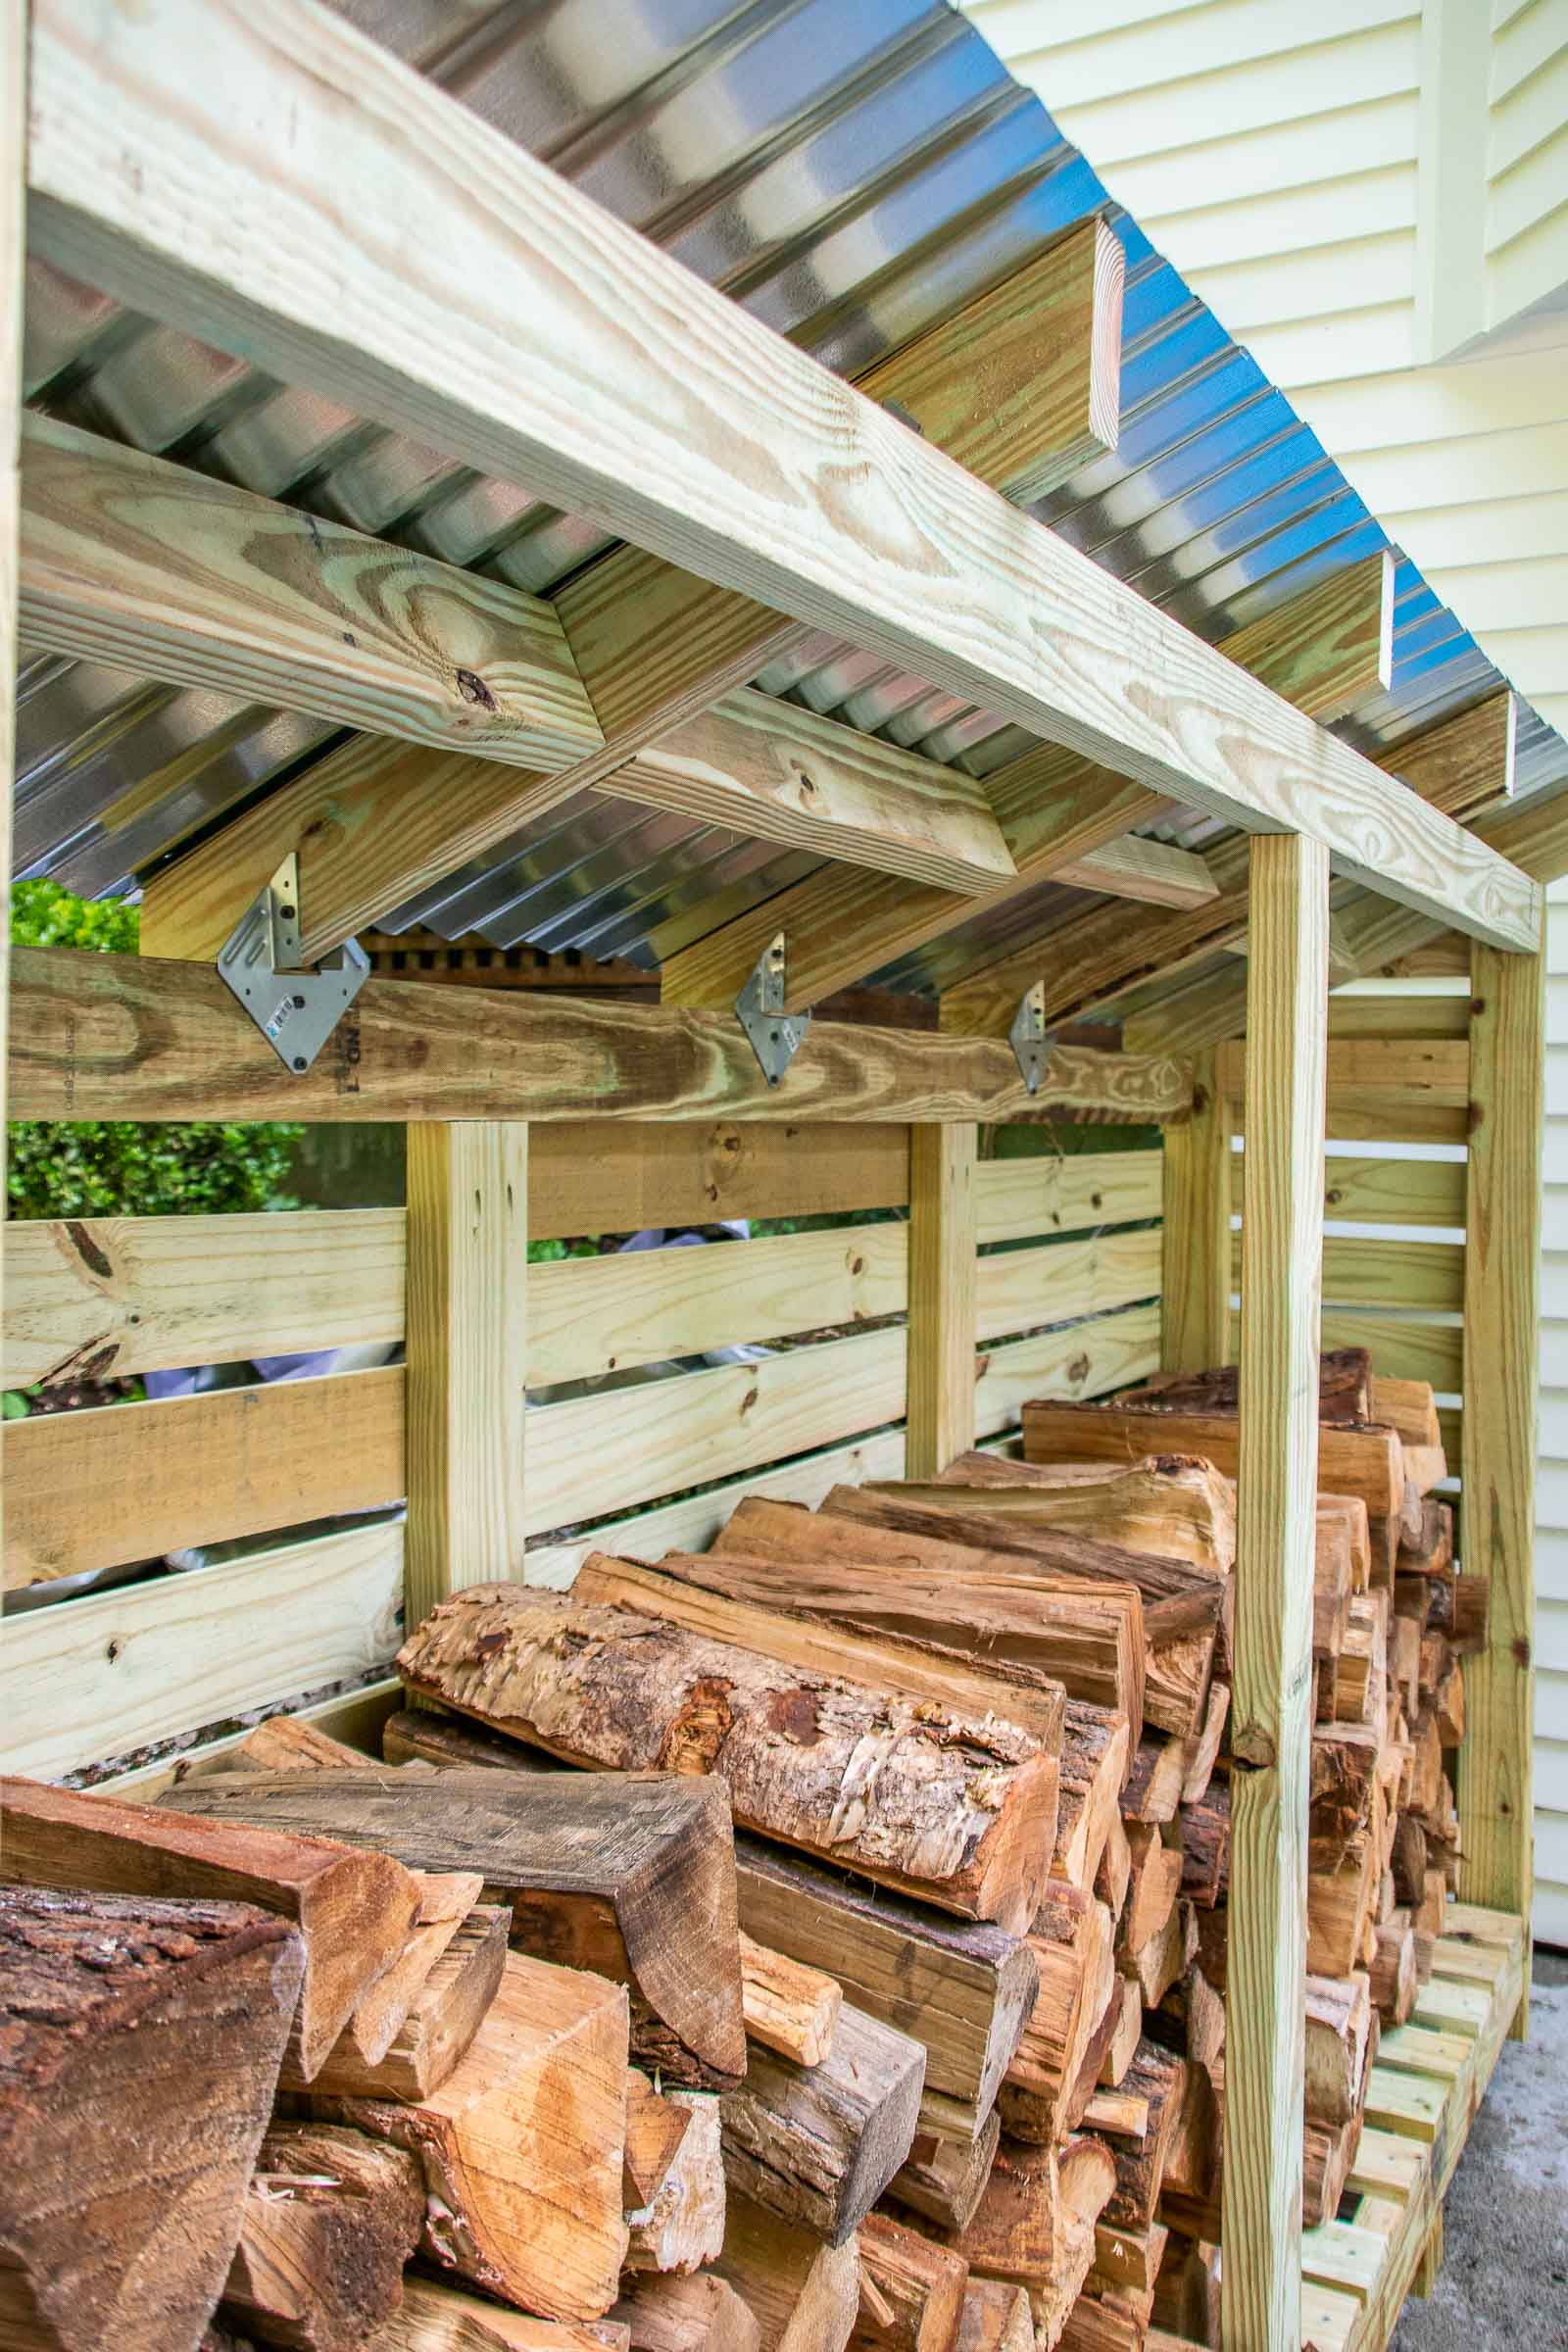 How to Build Your Own Firewood Shed - At Charlotte's House